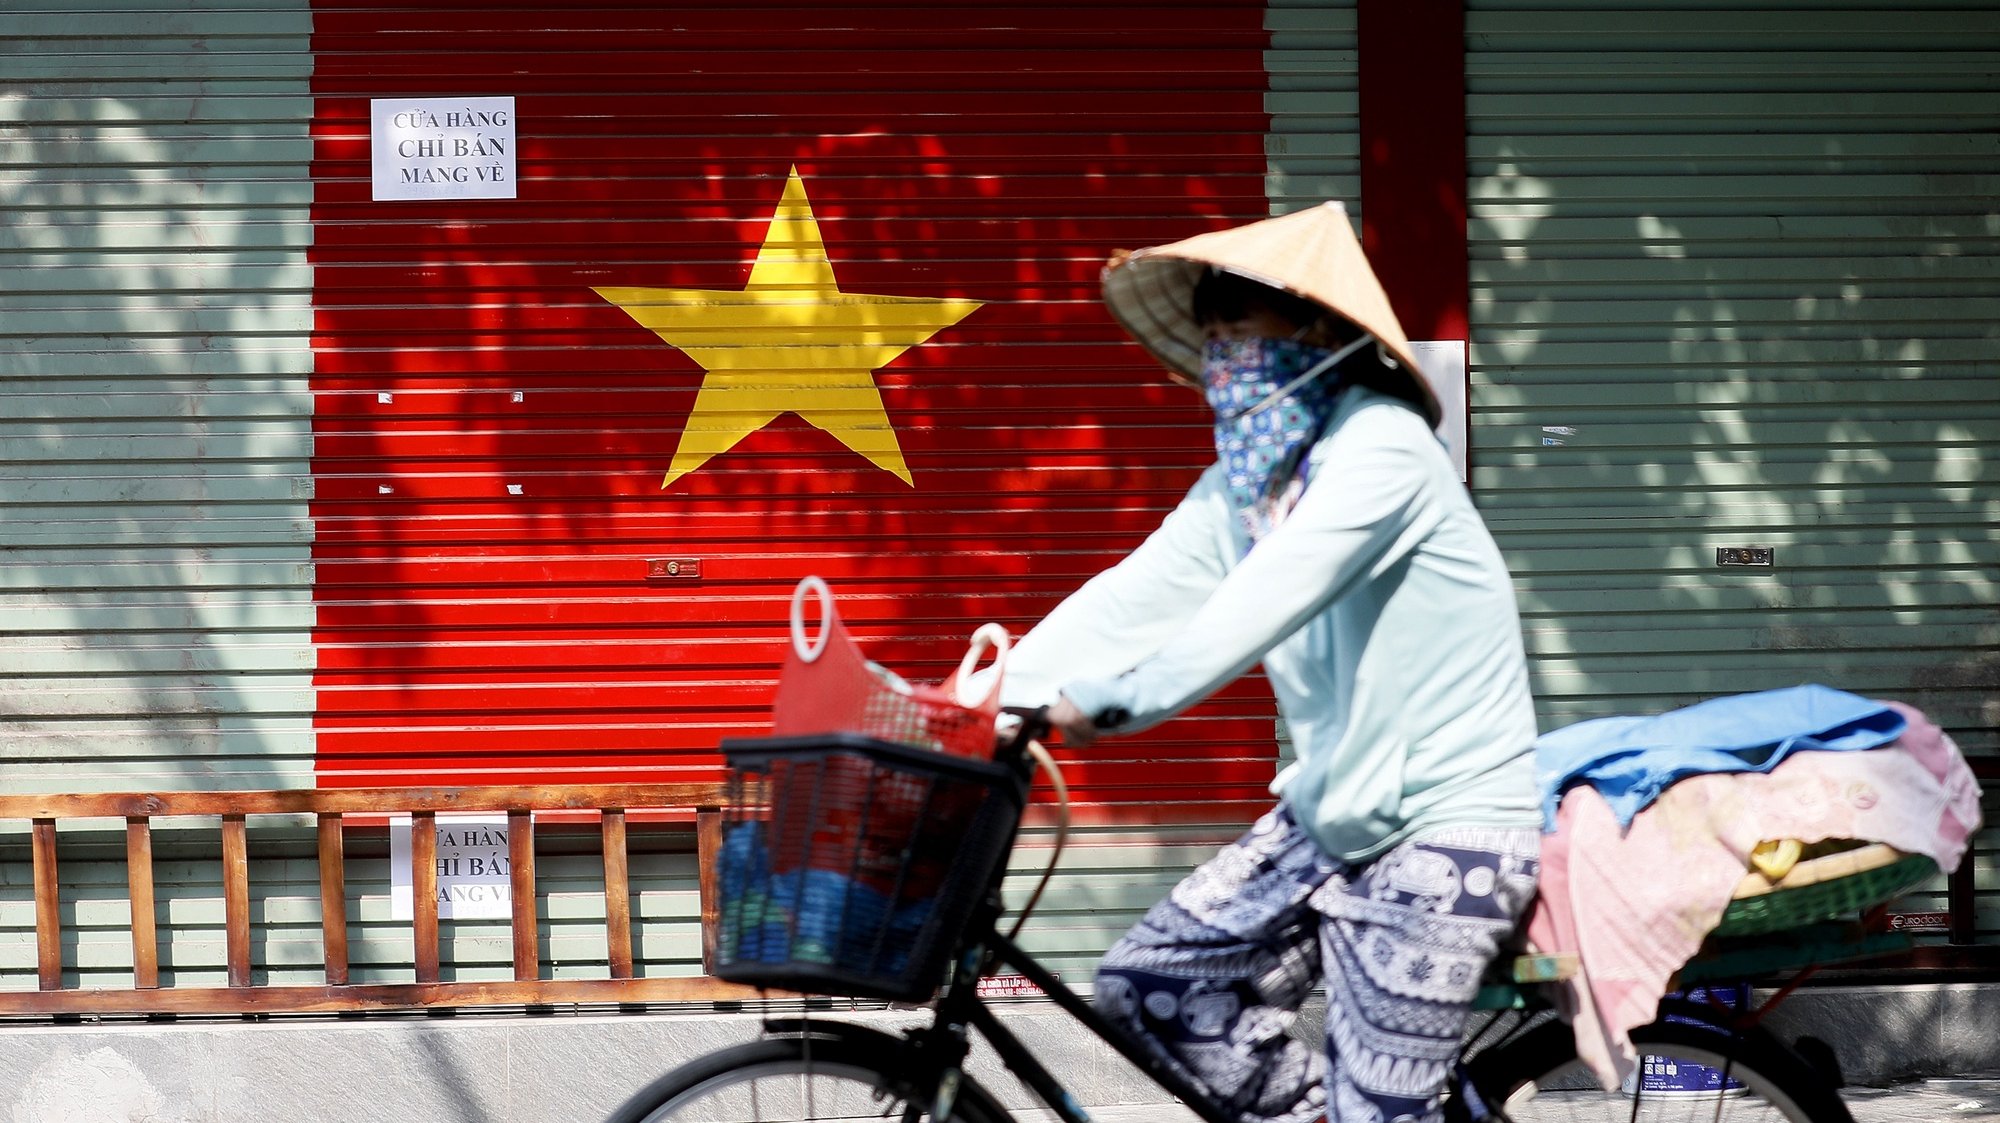 epa09352987 A woman wearing a face mask rides bicycle at a street in Hanoi, Vietnam, 19 July 2021. Vietnam tightened restrictions in 19 provinces, after nearly 6,000 new COVID-19 cases were reported in one day in the country.  EPA/LUONG THAI LINH